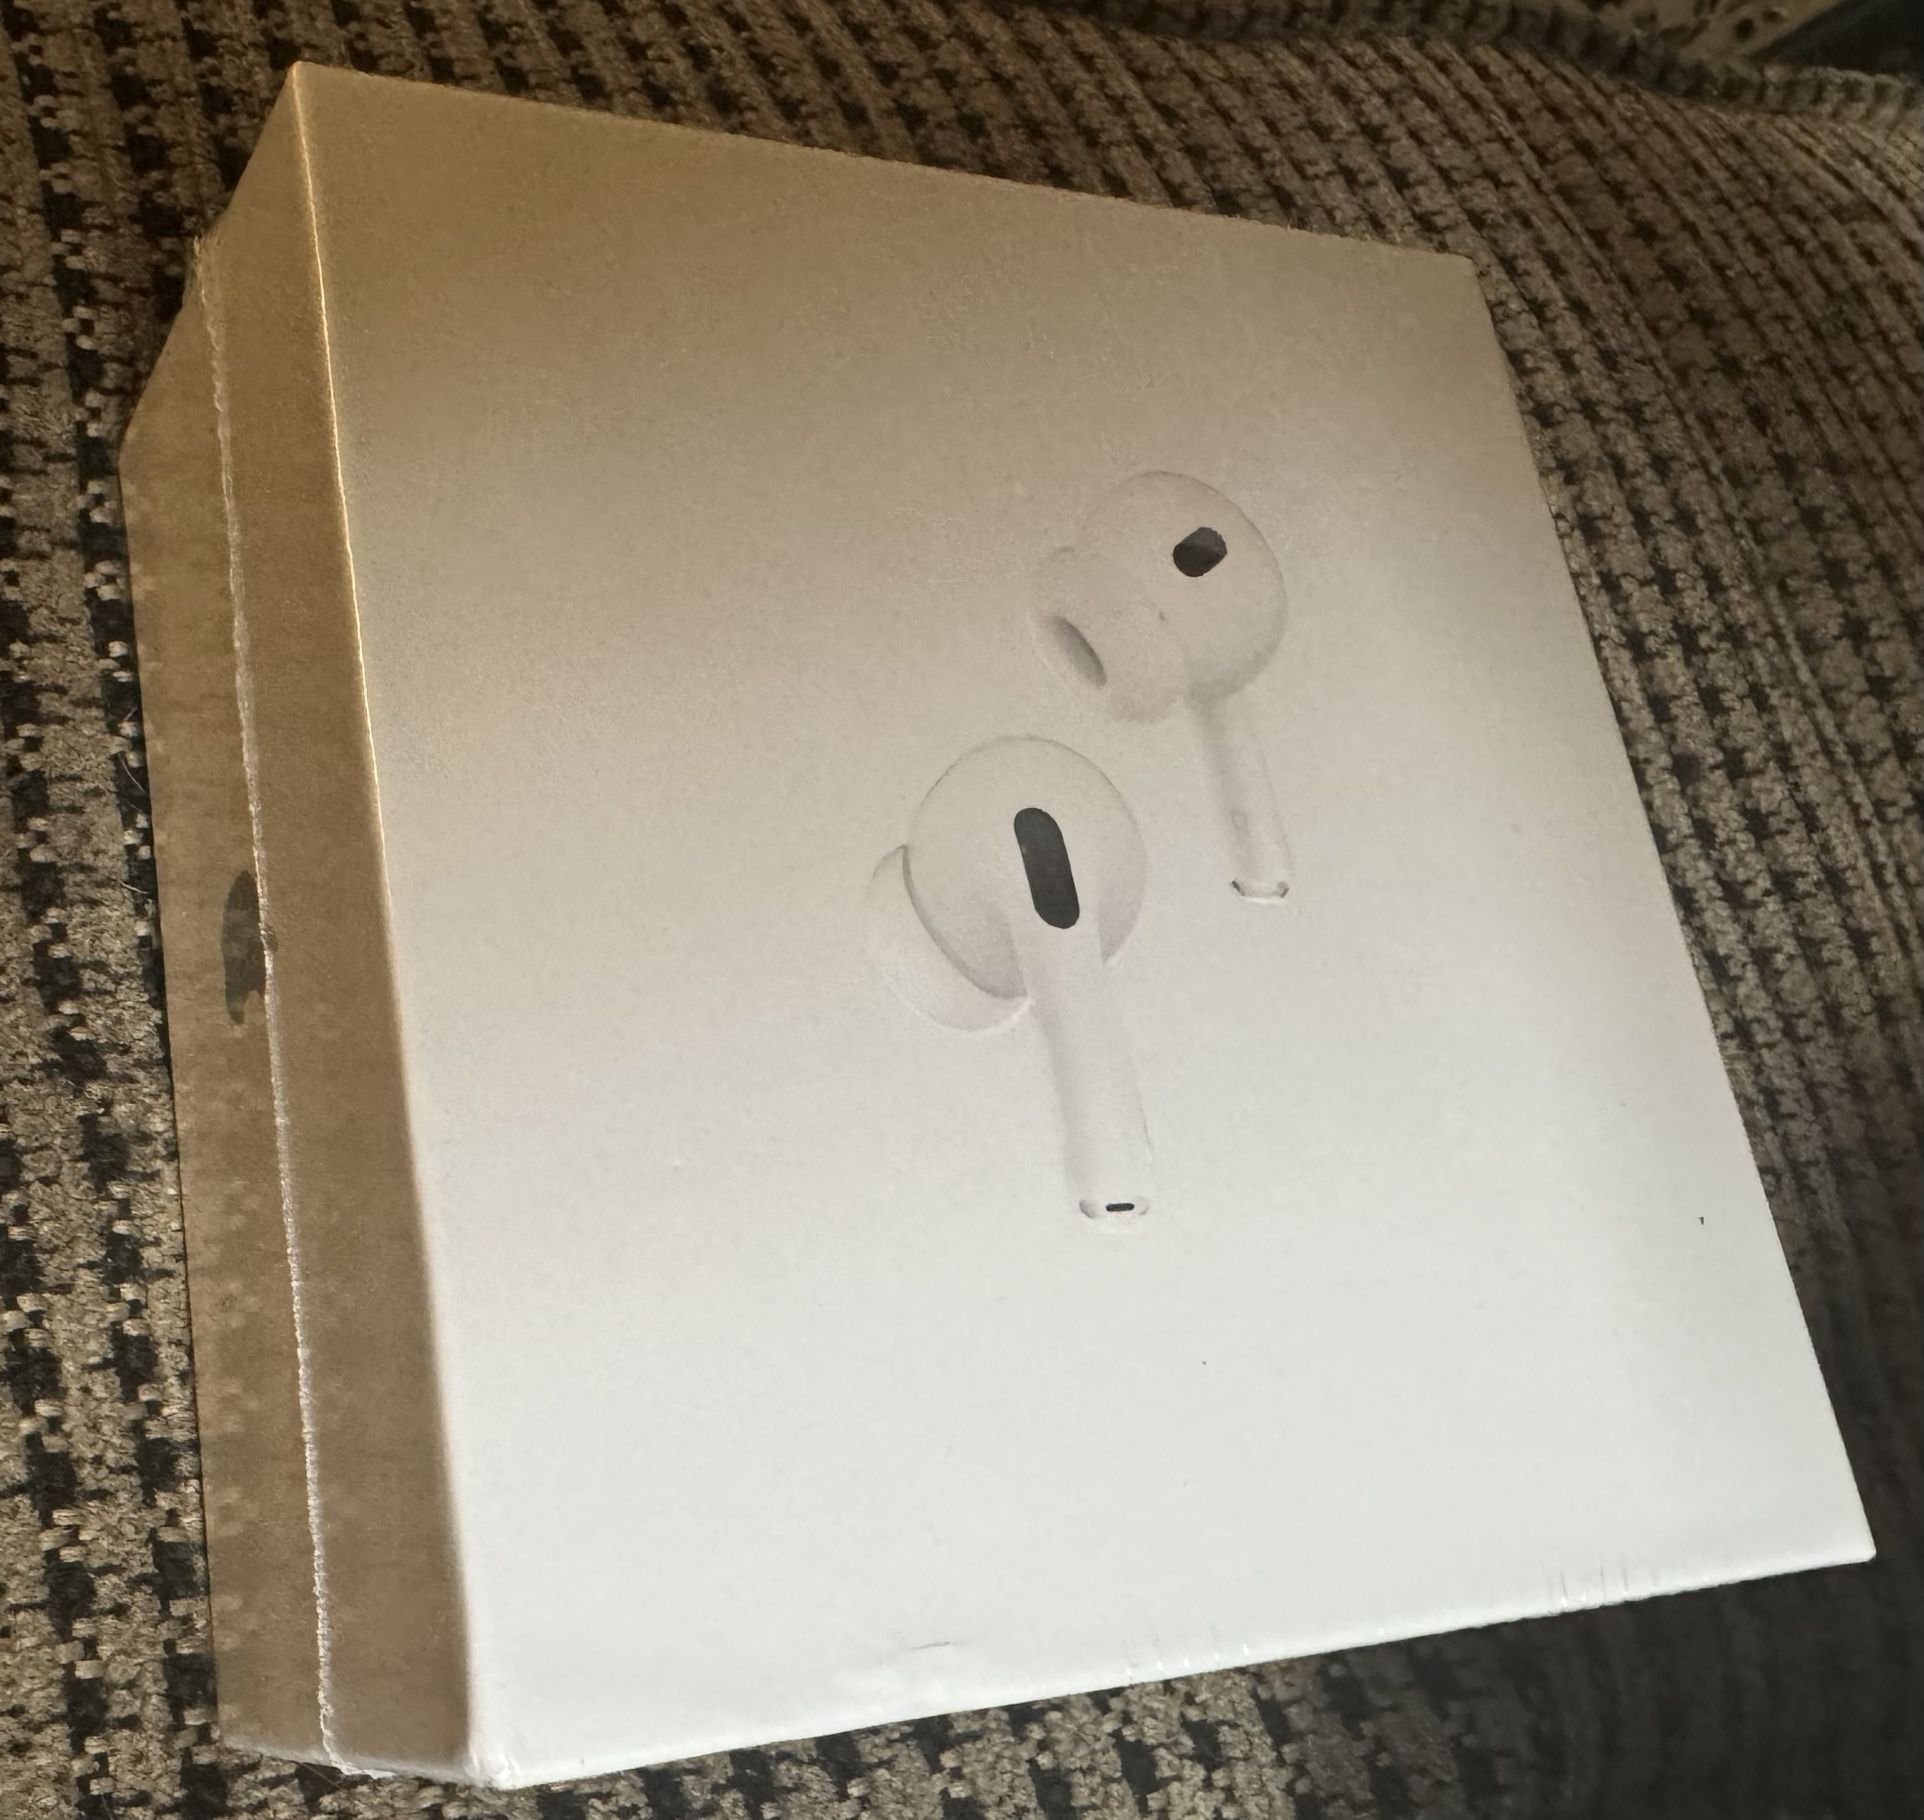 New!! Apple Airpods Pro Generation 2 with Magsafe Charging Case, Retails for $249